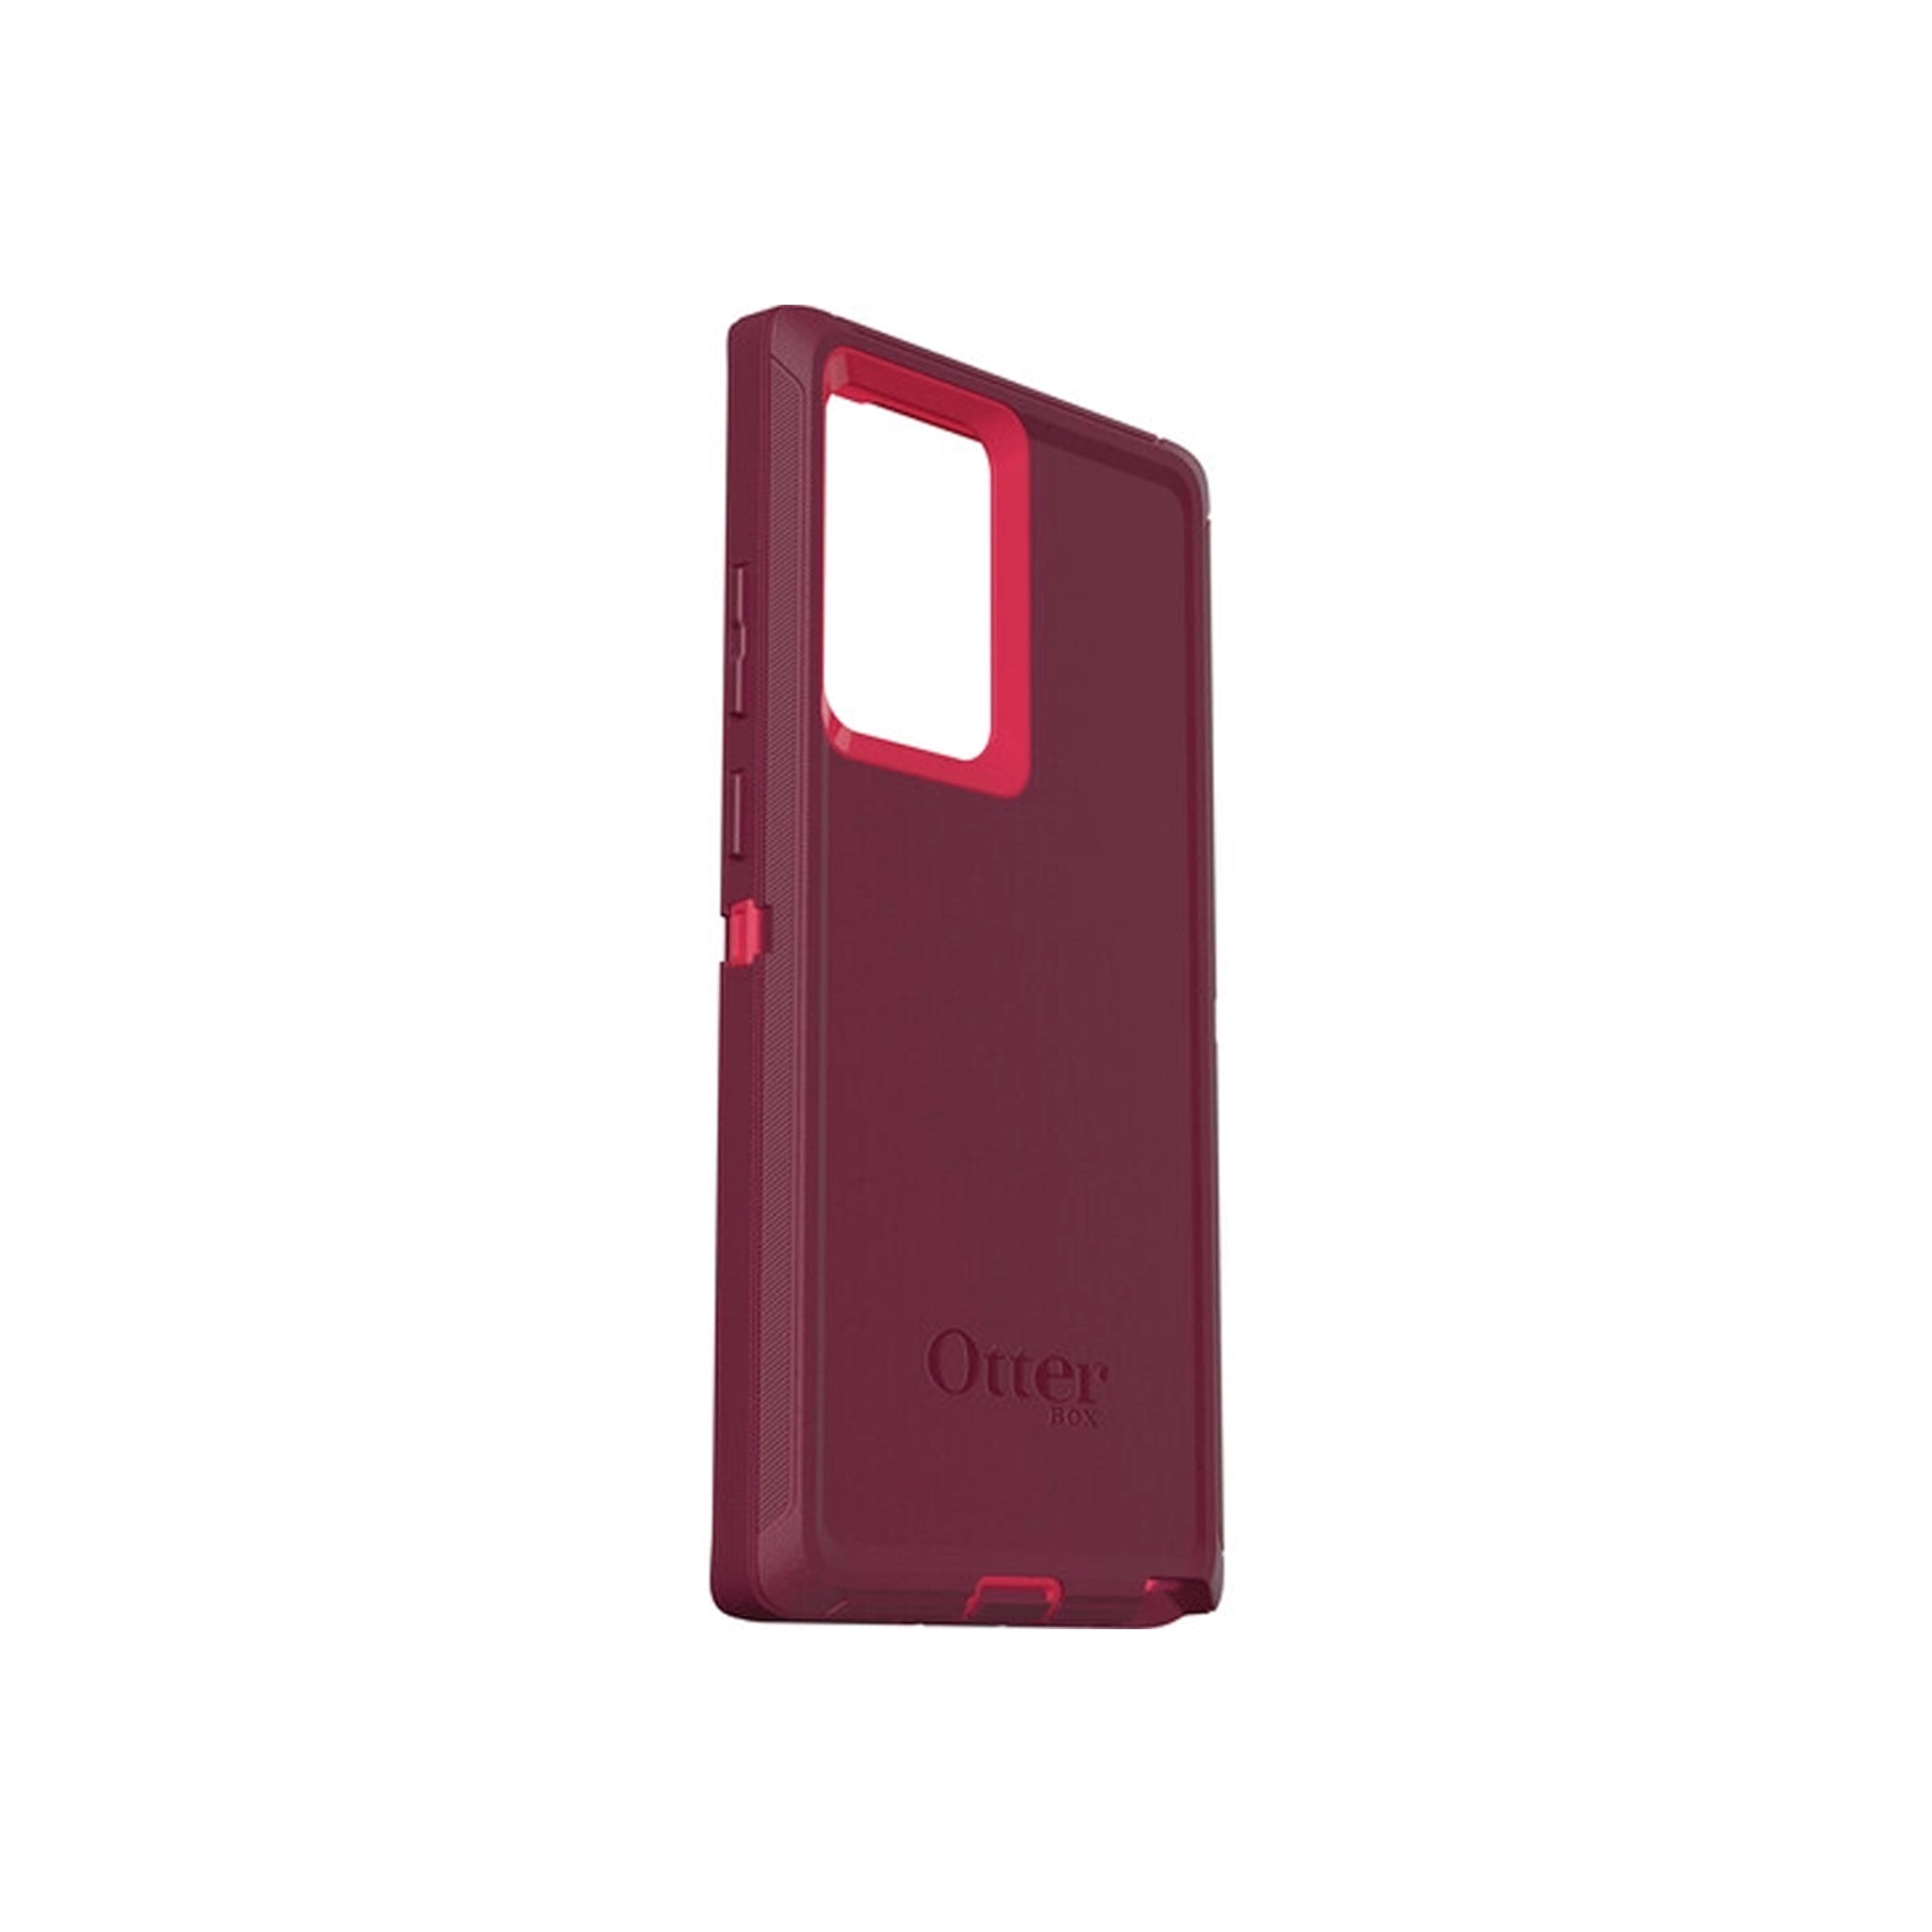 OtterBox - Defender Series Case for Galaxy Note 20 Ultra 5G - Berry Potion Pink